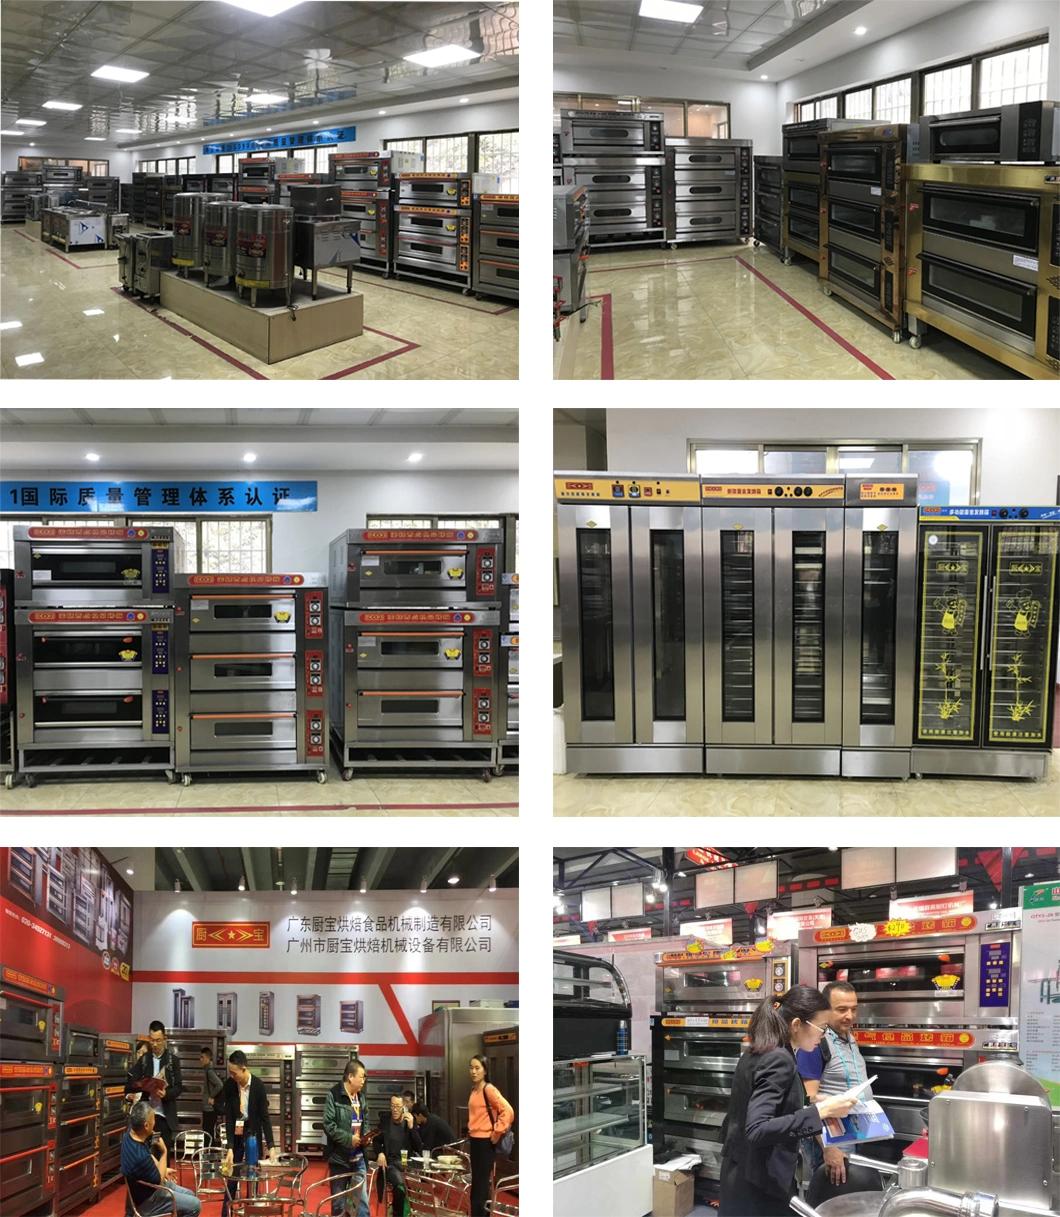 Commercial Restaurant Kitchen 3 Deck 6 Trays Electric Oven for of Baking Equipment Bakery Machinery Food Machine